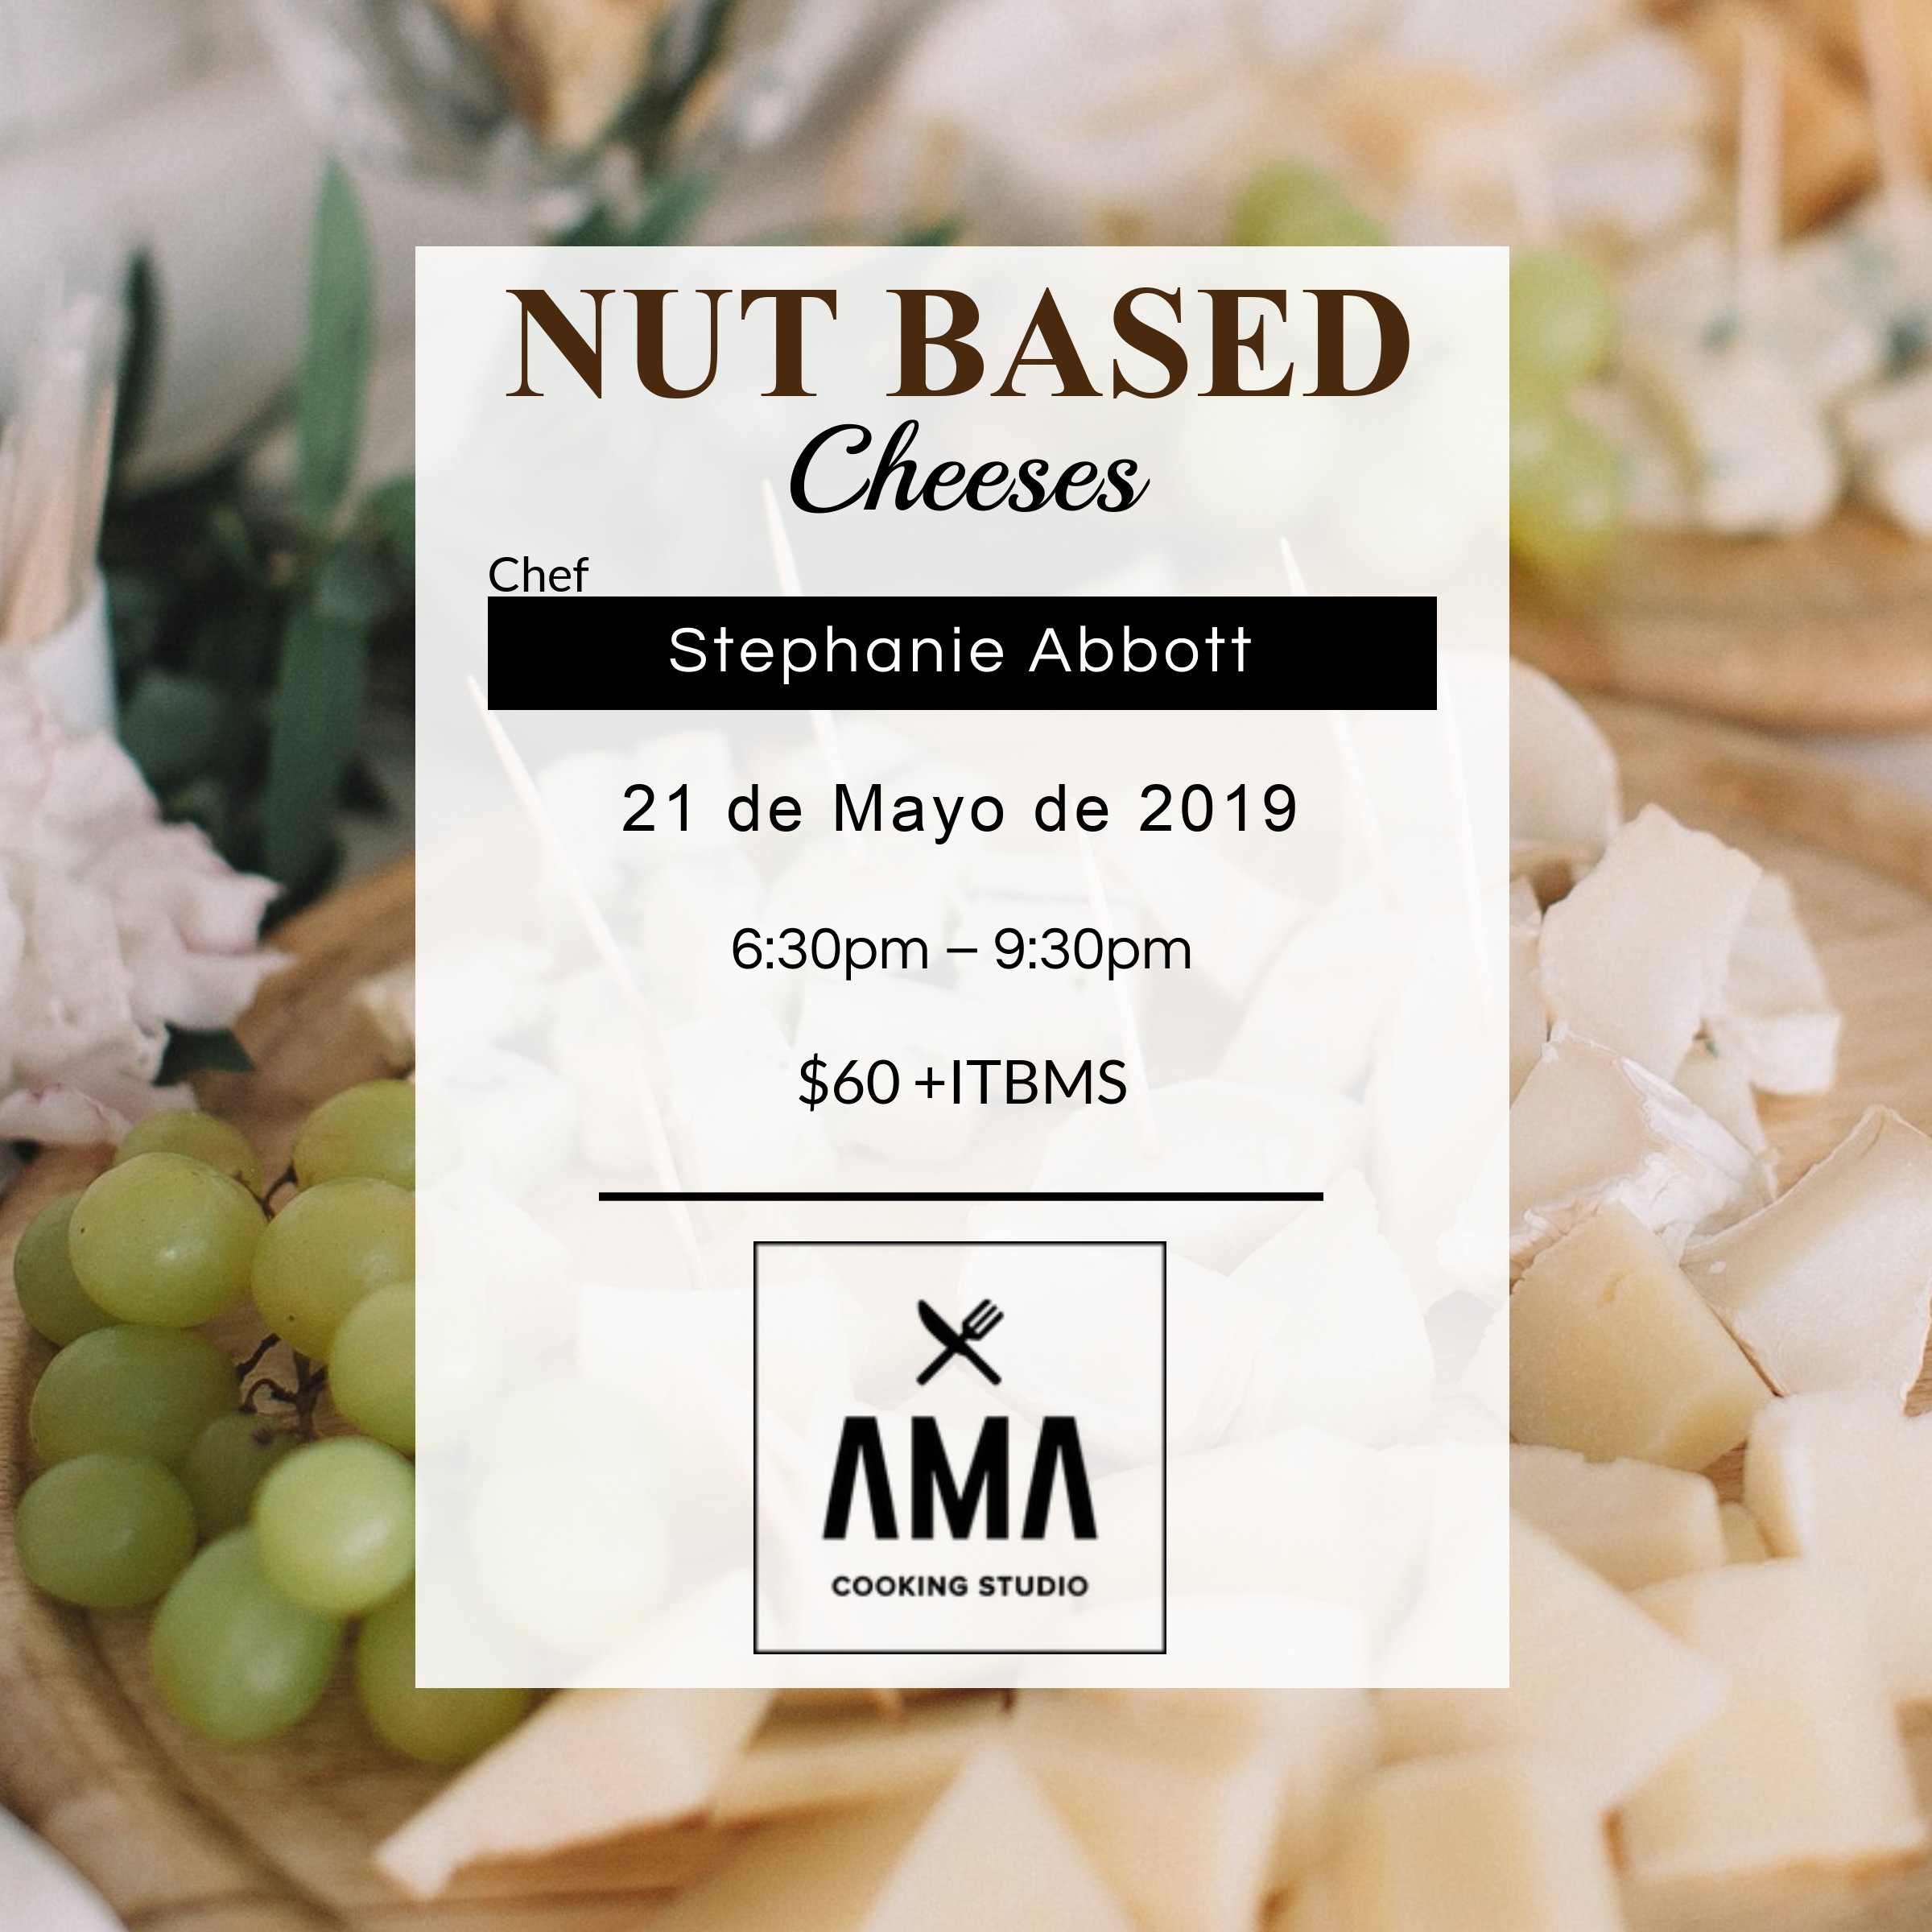 Nut Based Cheeses